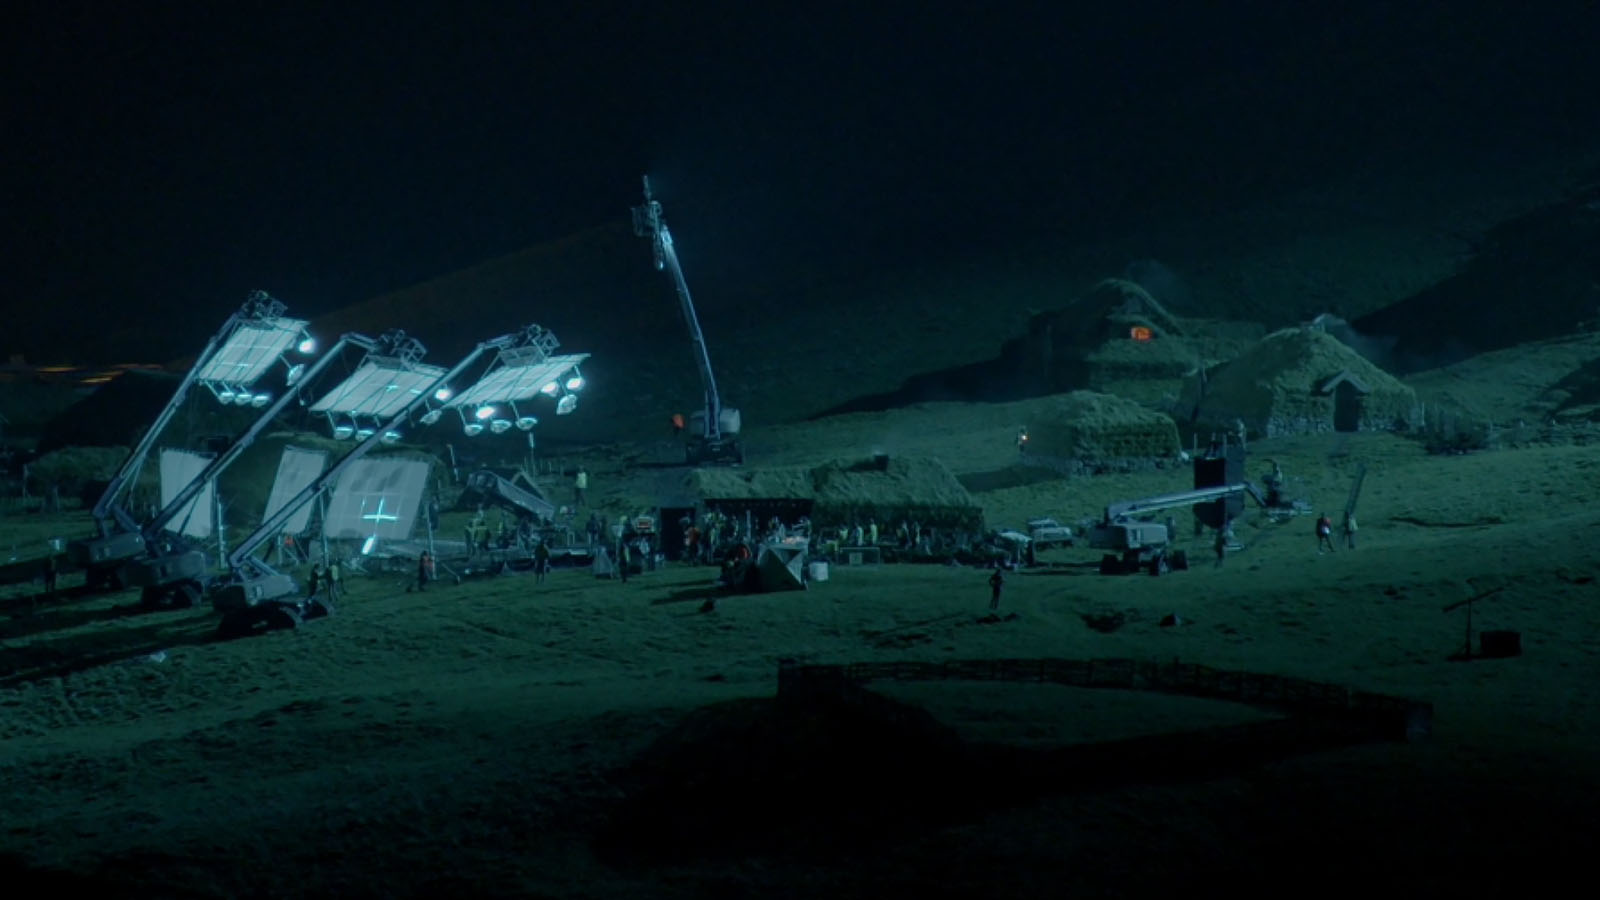 Massive lighting rigs make the set look like a diorama. Image © Focus Features